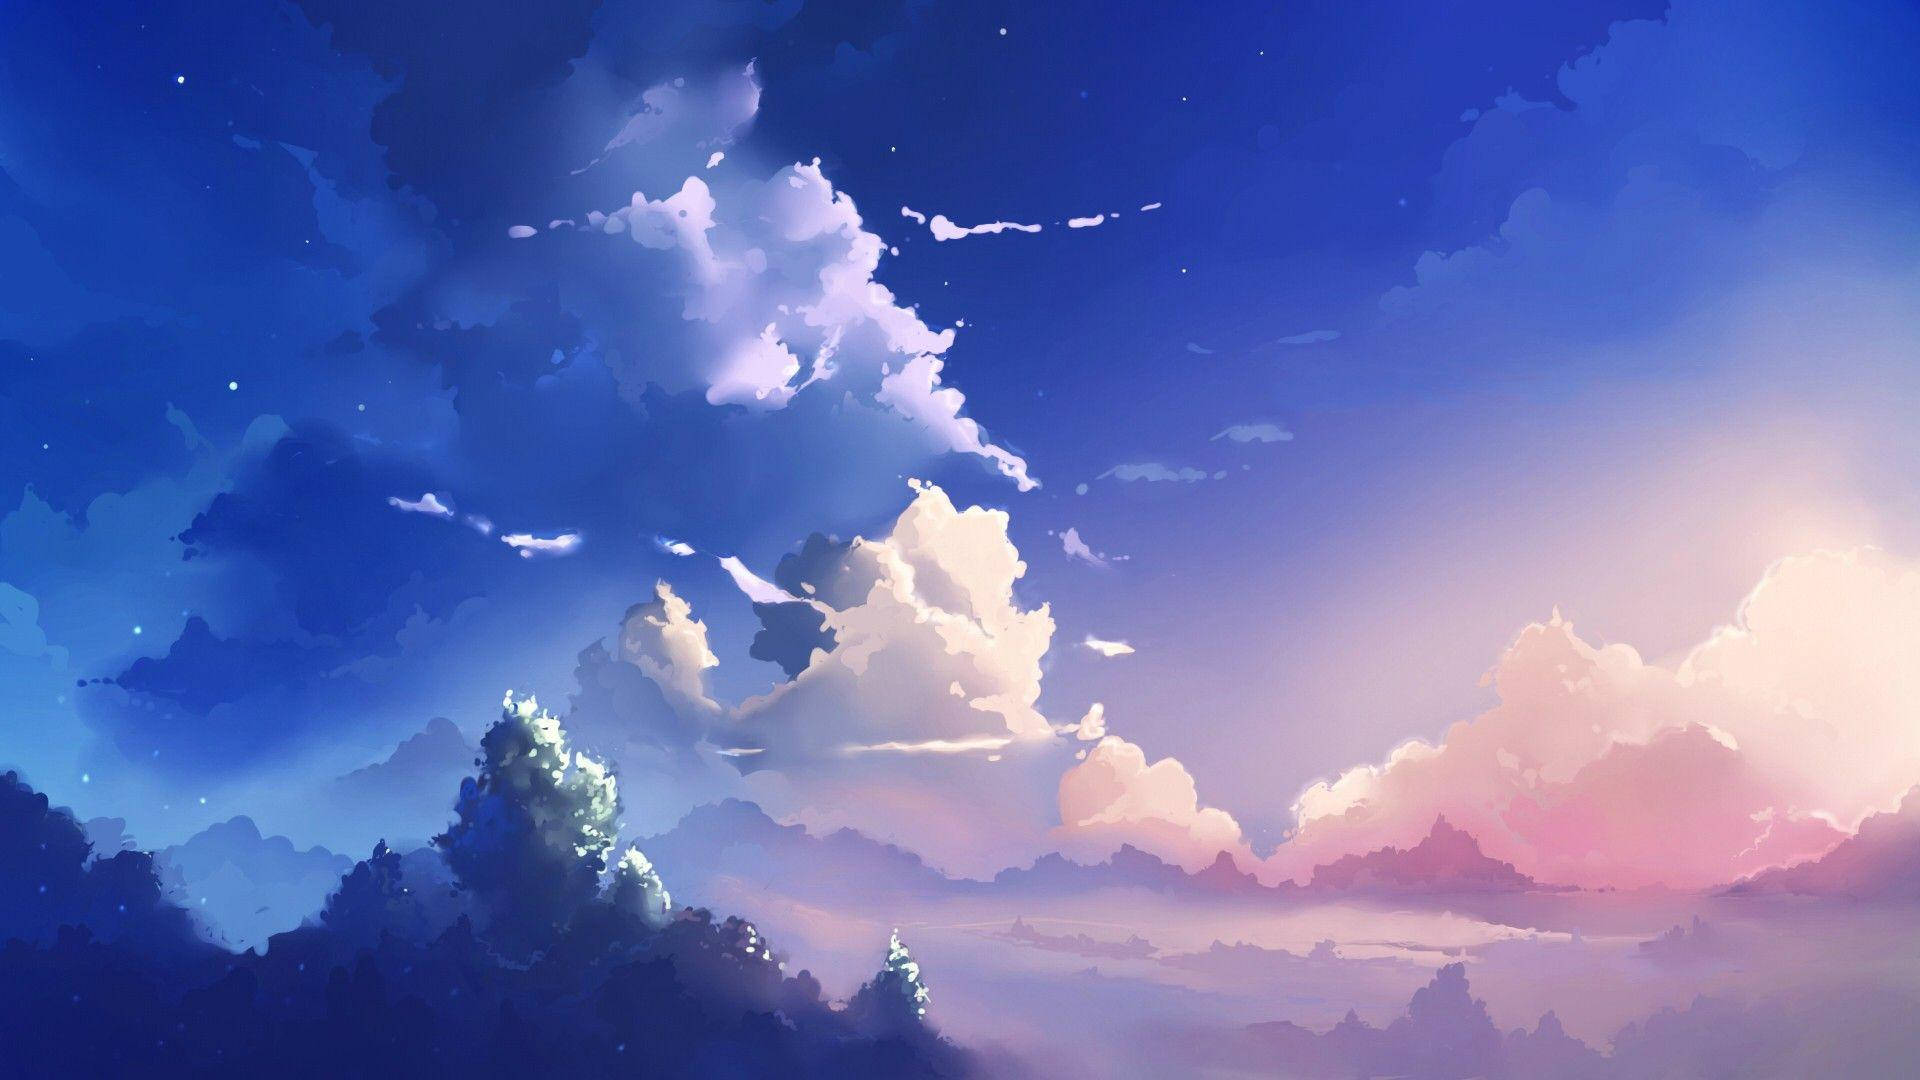 Twilight Clouds Aesthetic Anime Scenery Wallpaper